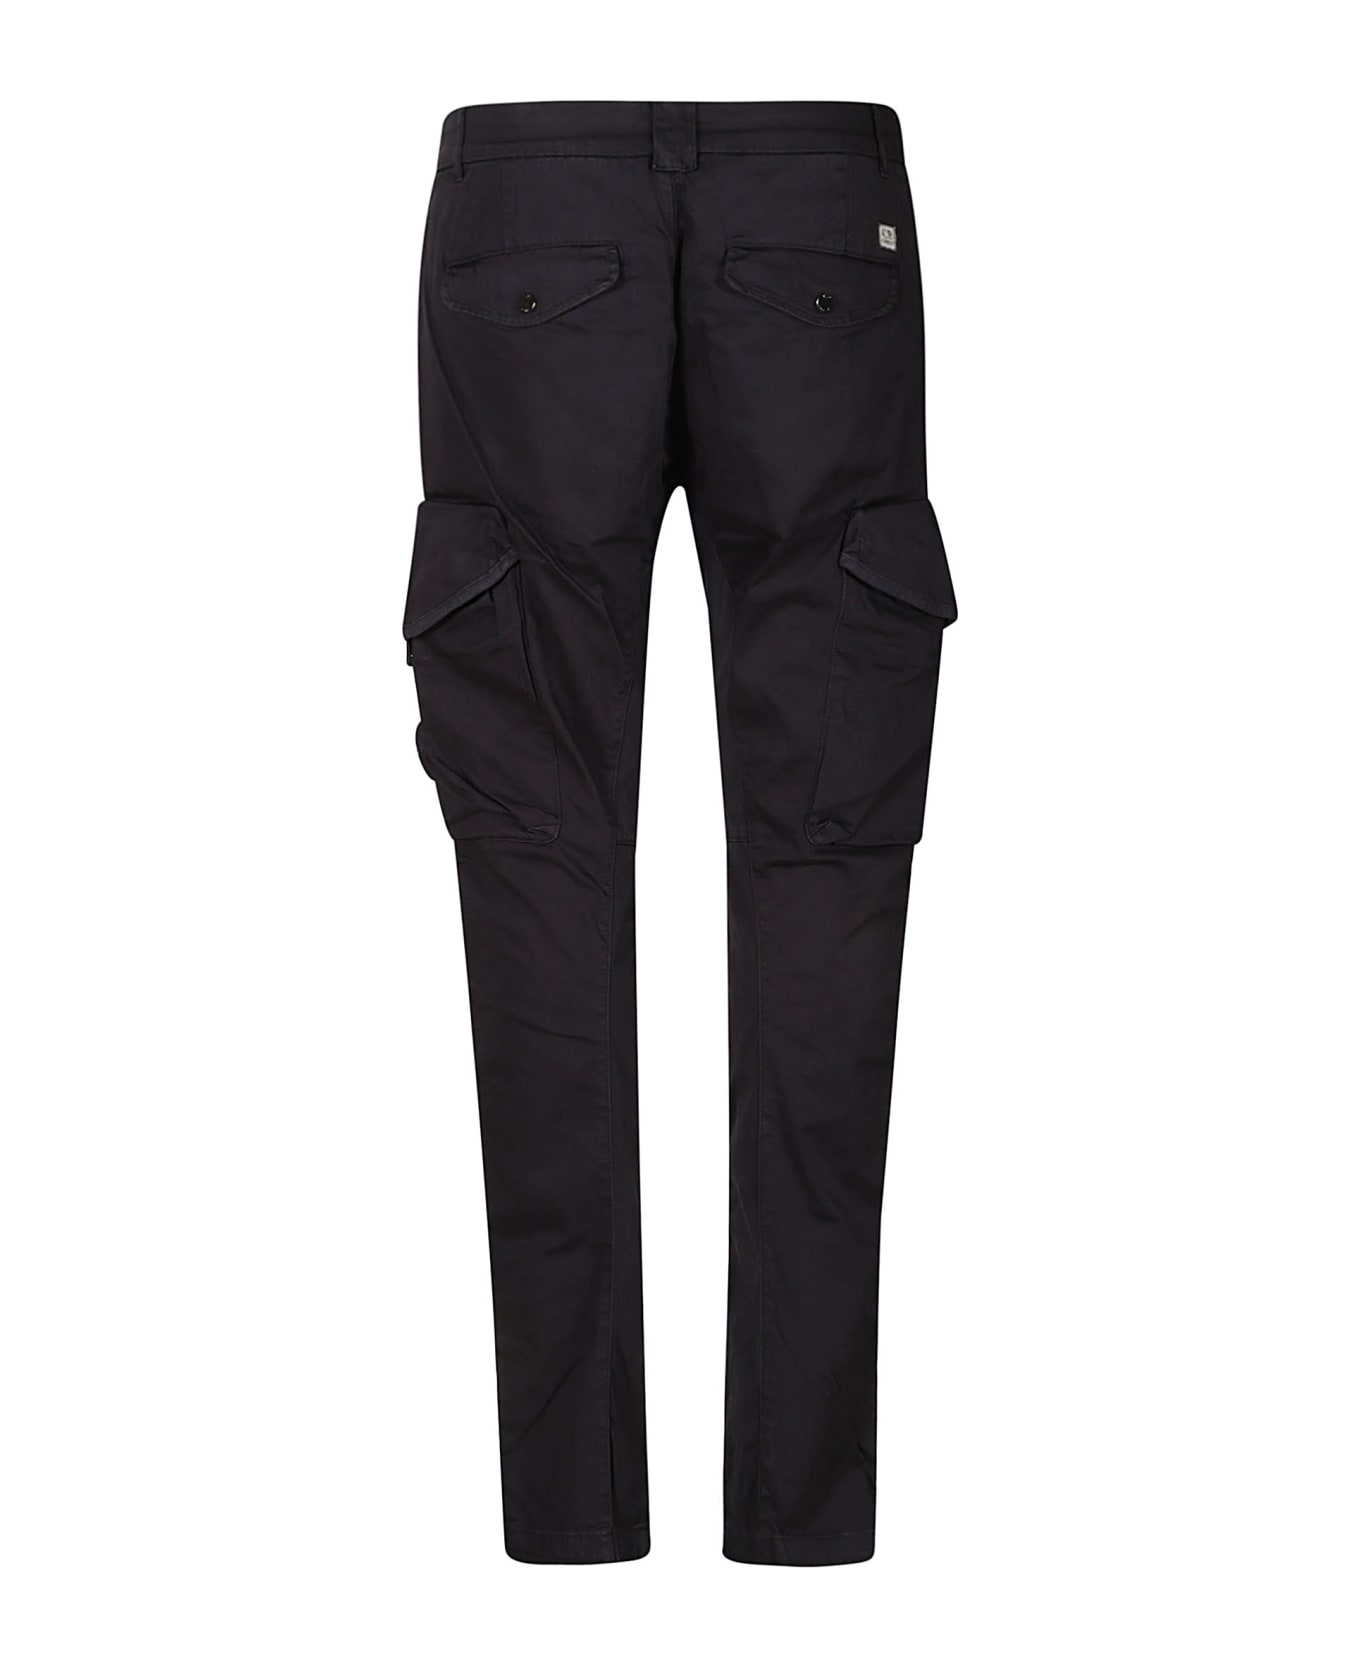 C.P. Company Cargo Buttoned Awards Trousers - TOTAL ECLIPSE